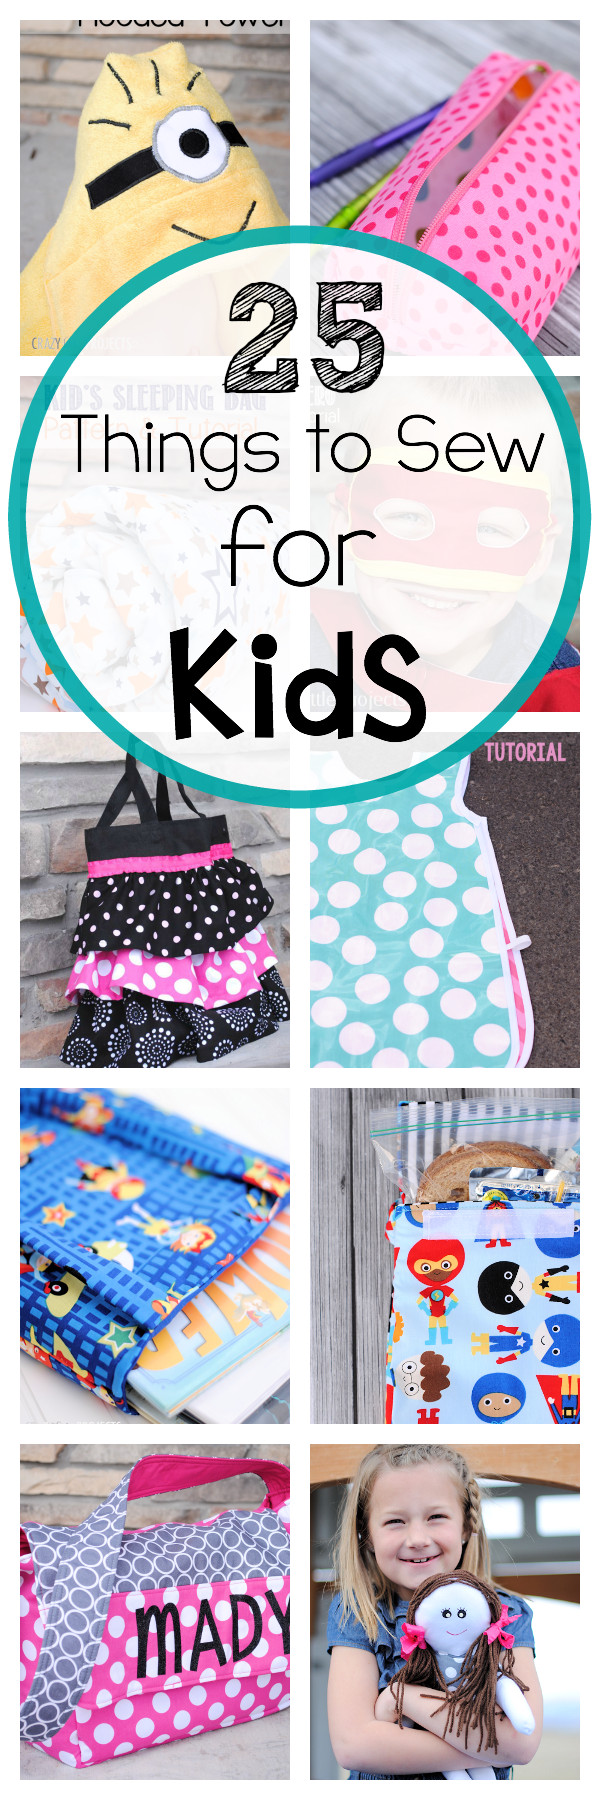 Cute Things For Kids
 25 Things to Sew for Kids Crazy Little Projects